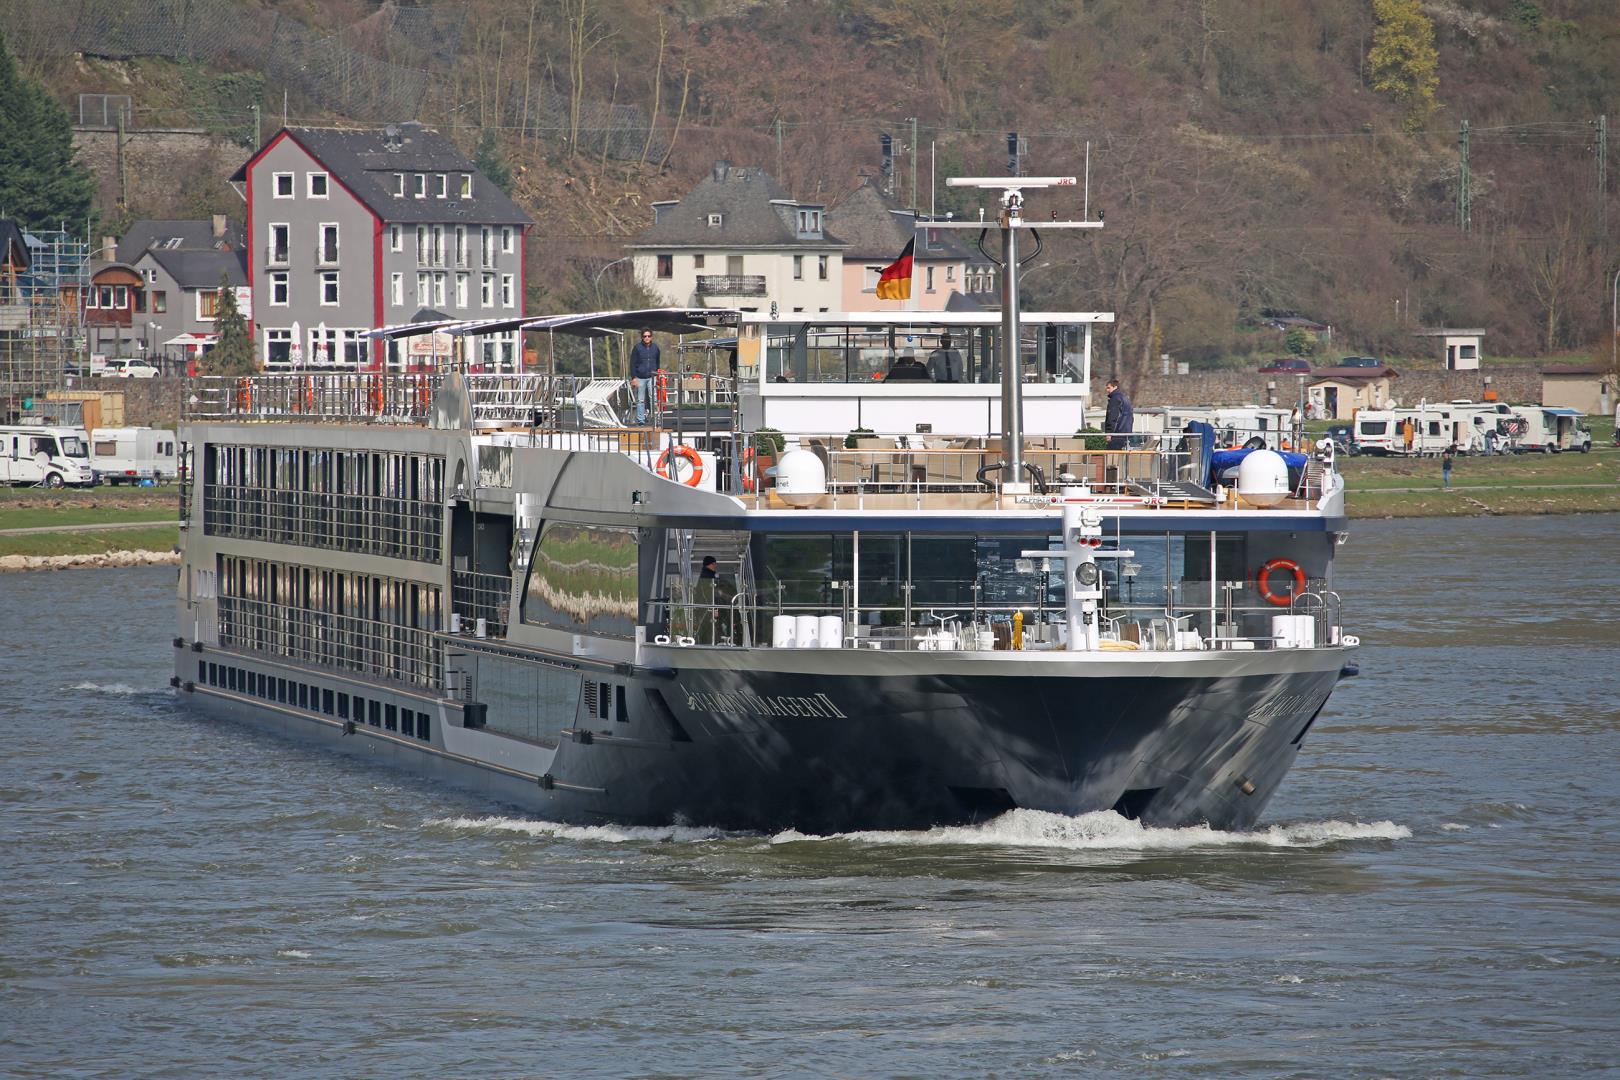 The Rhine & Moselle: Canals, Vineyards & Castles With 1 Night In Amsterdam & 2 Nights In Paris